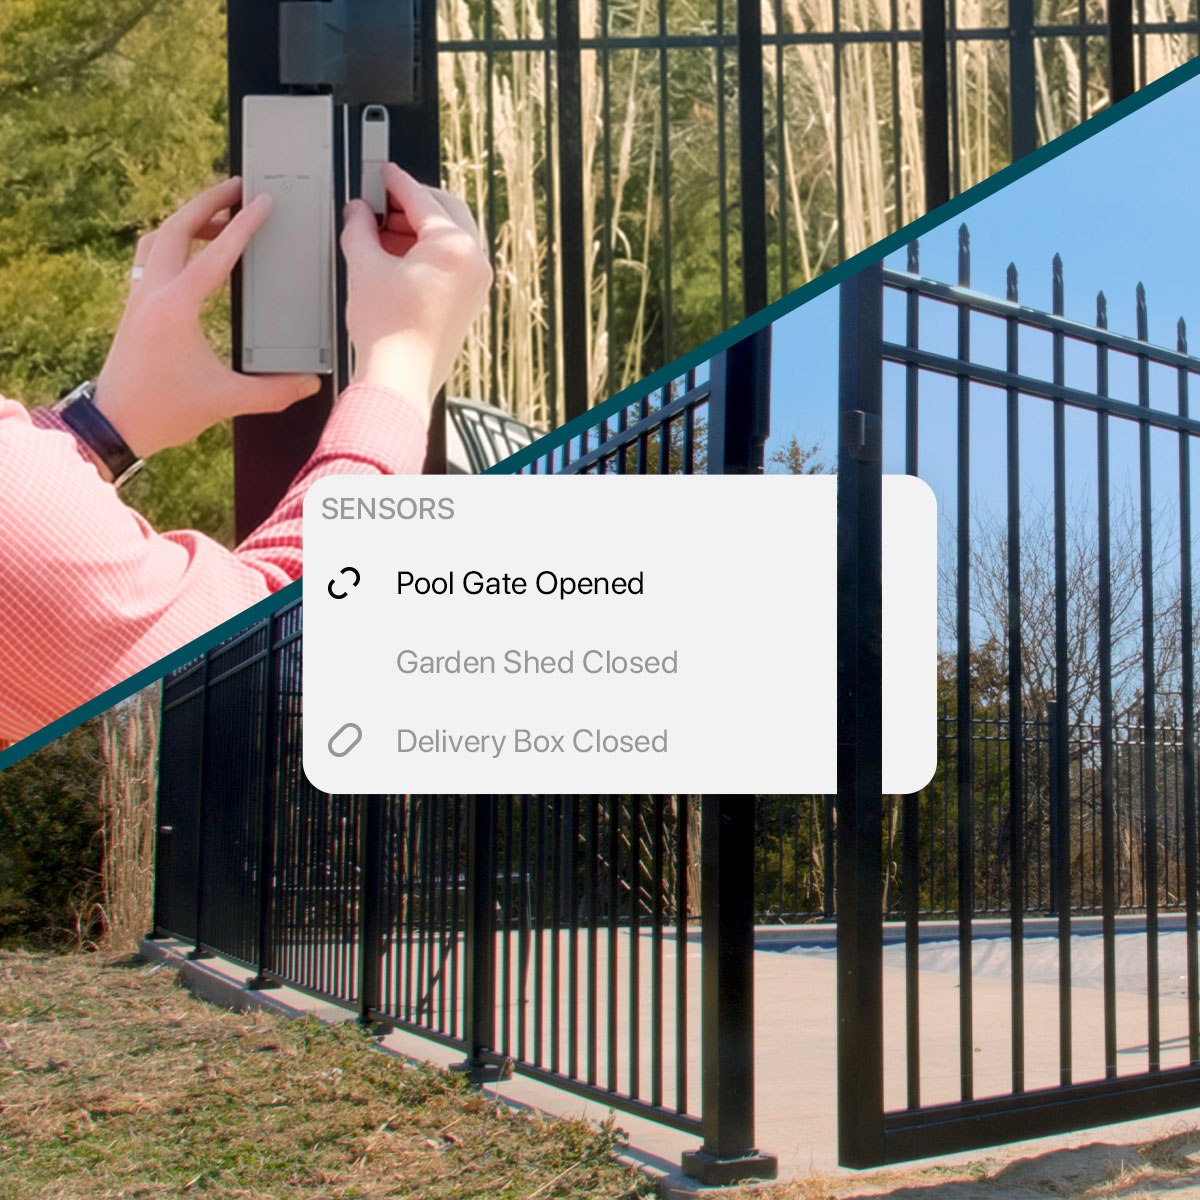 Pool gate opens and the cellular contact sensor updates status on mobile app